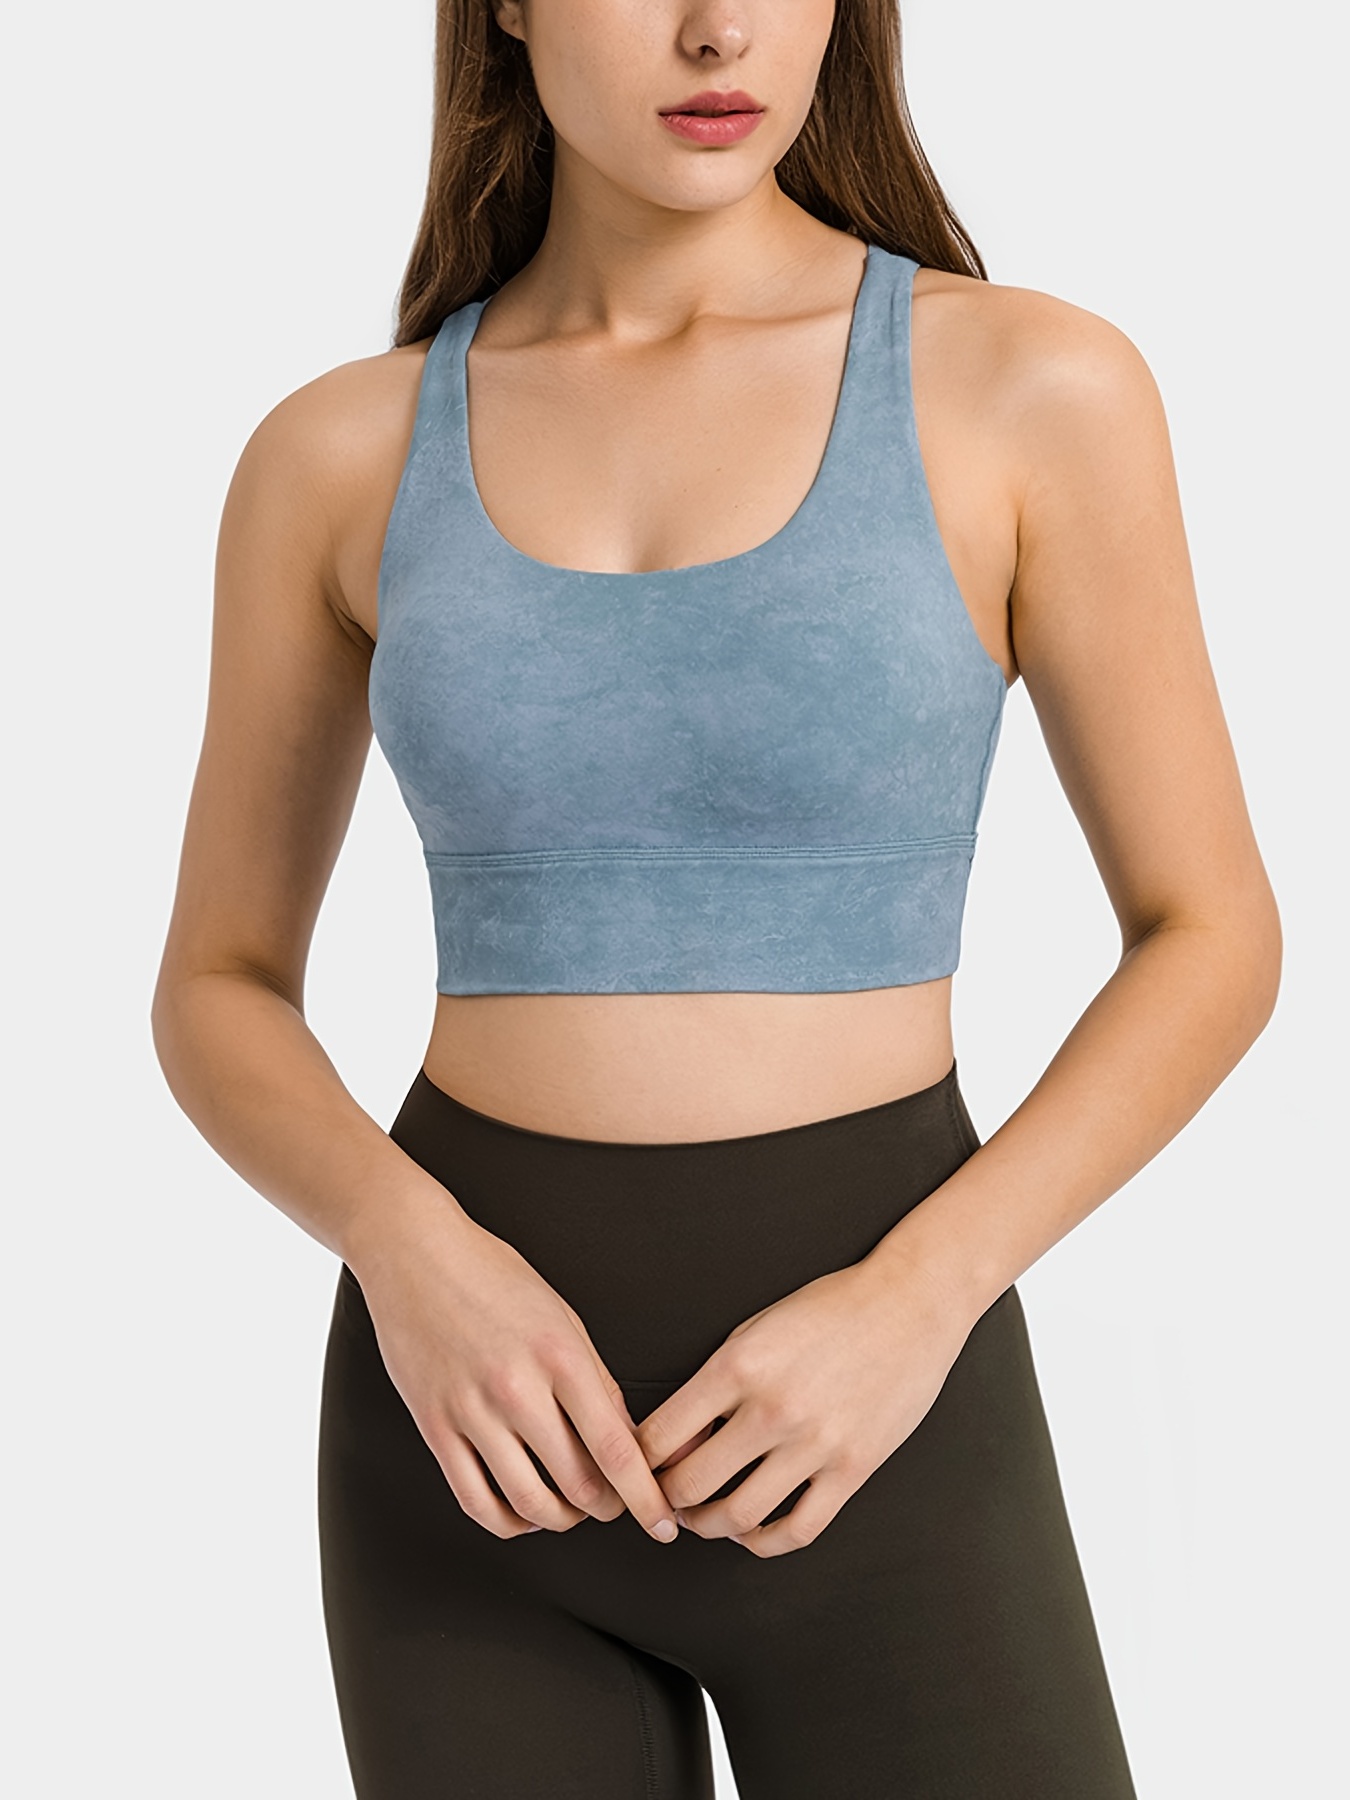 Women's Activewear: Solid Wide Straps High Impact Sports Bra